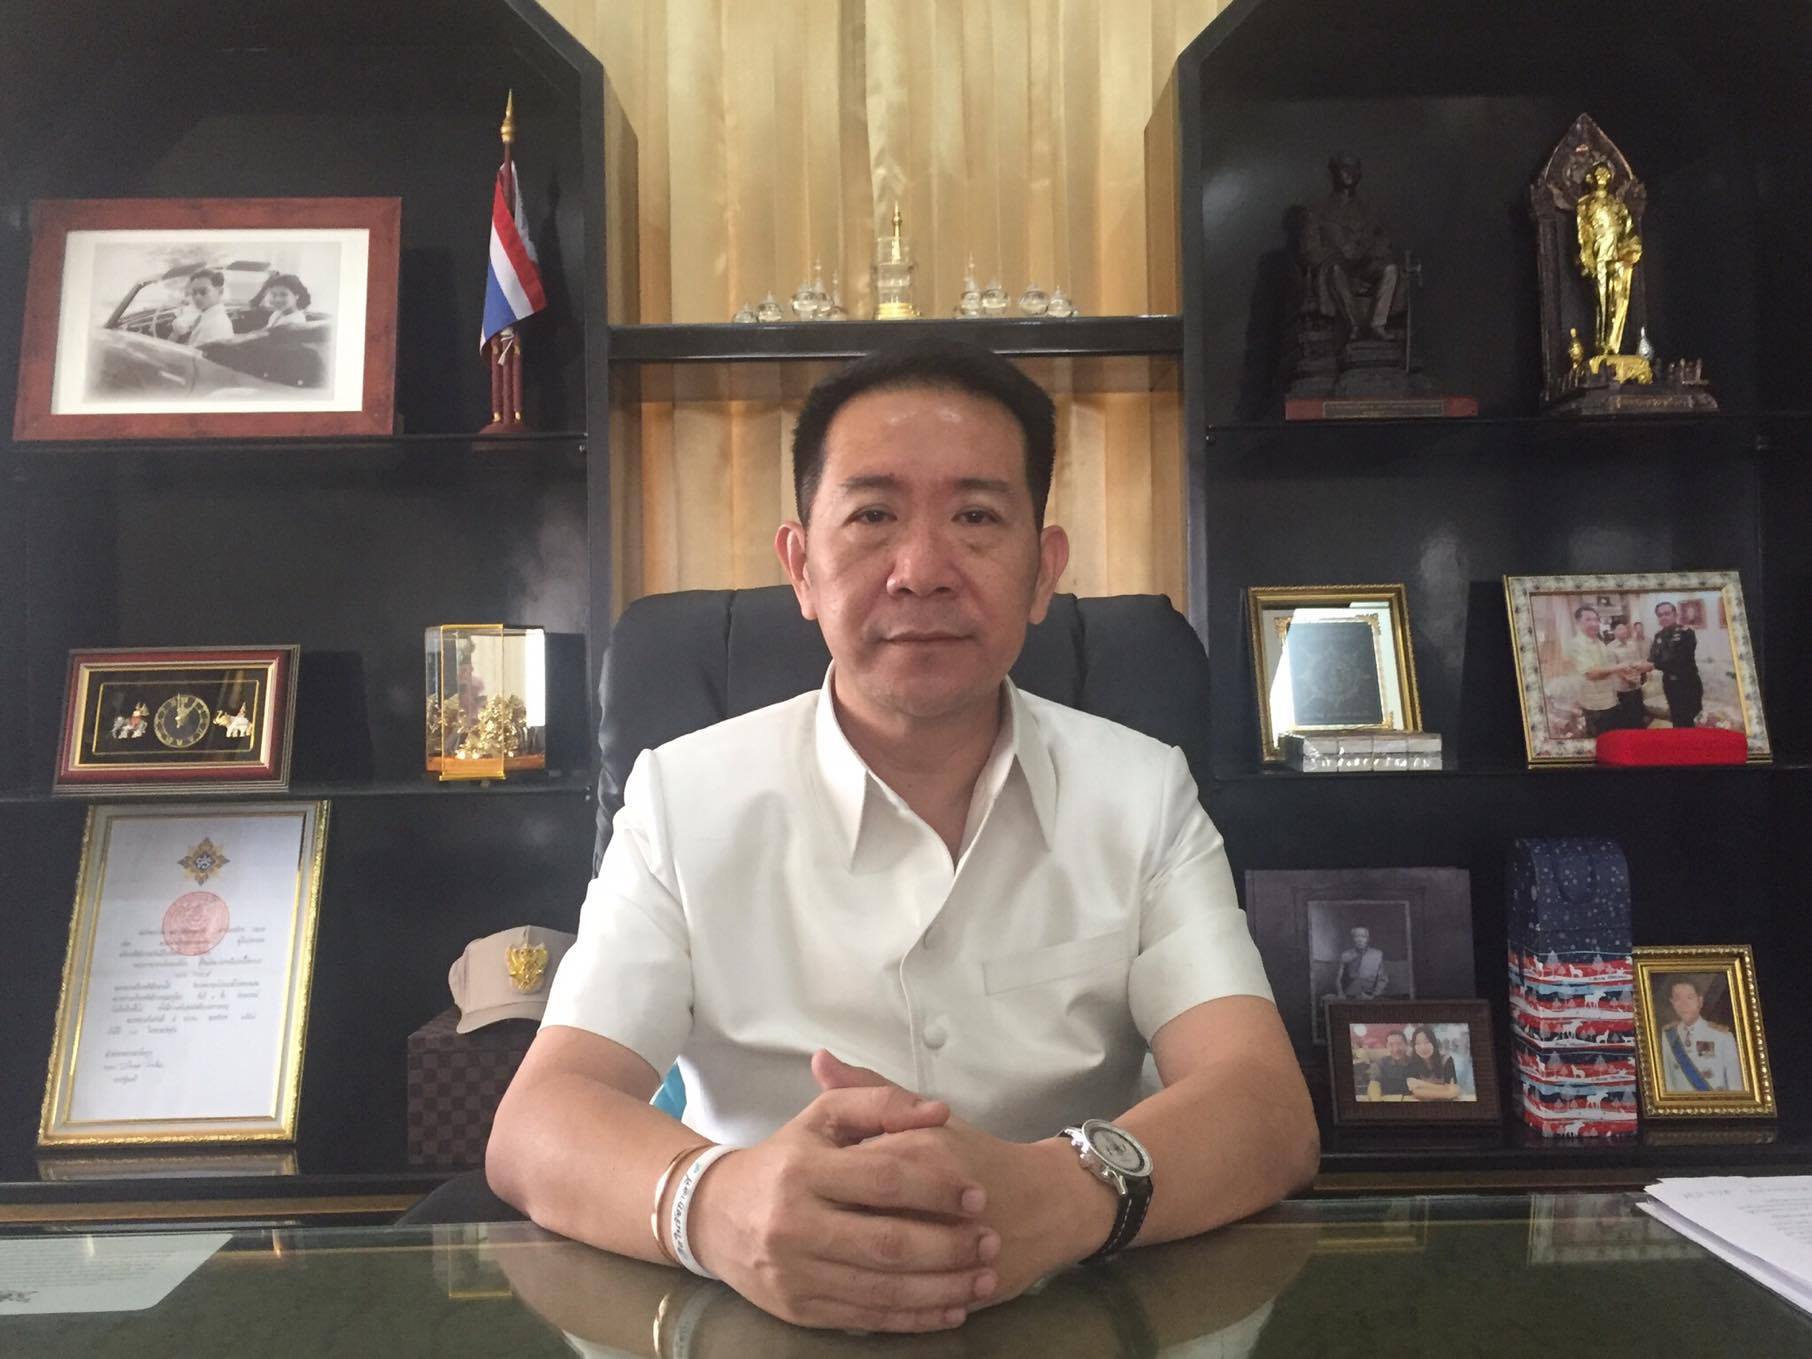 Banglamung District Chief Naris Niramaiwong called on businesses and residents to work together to solve community problems, saying government can’t do it alone.